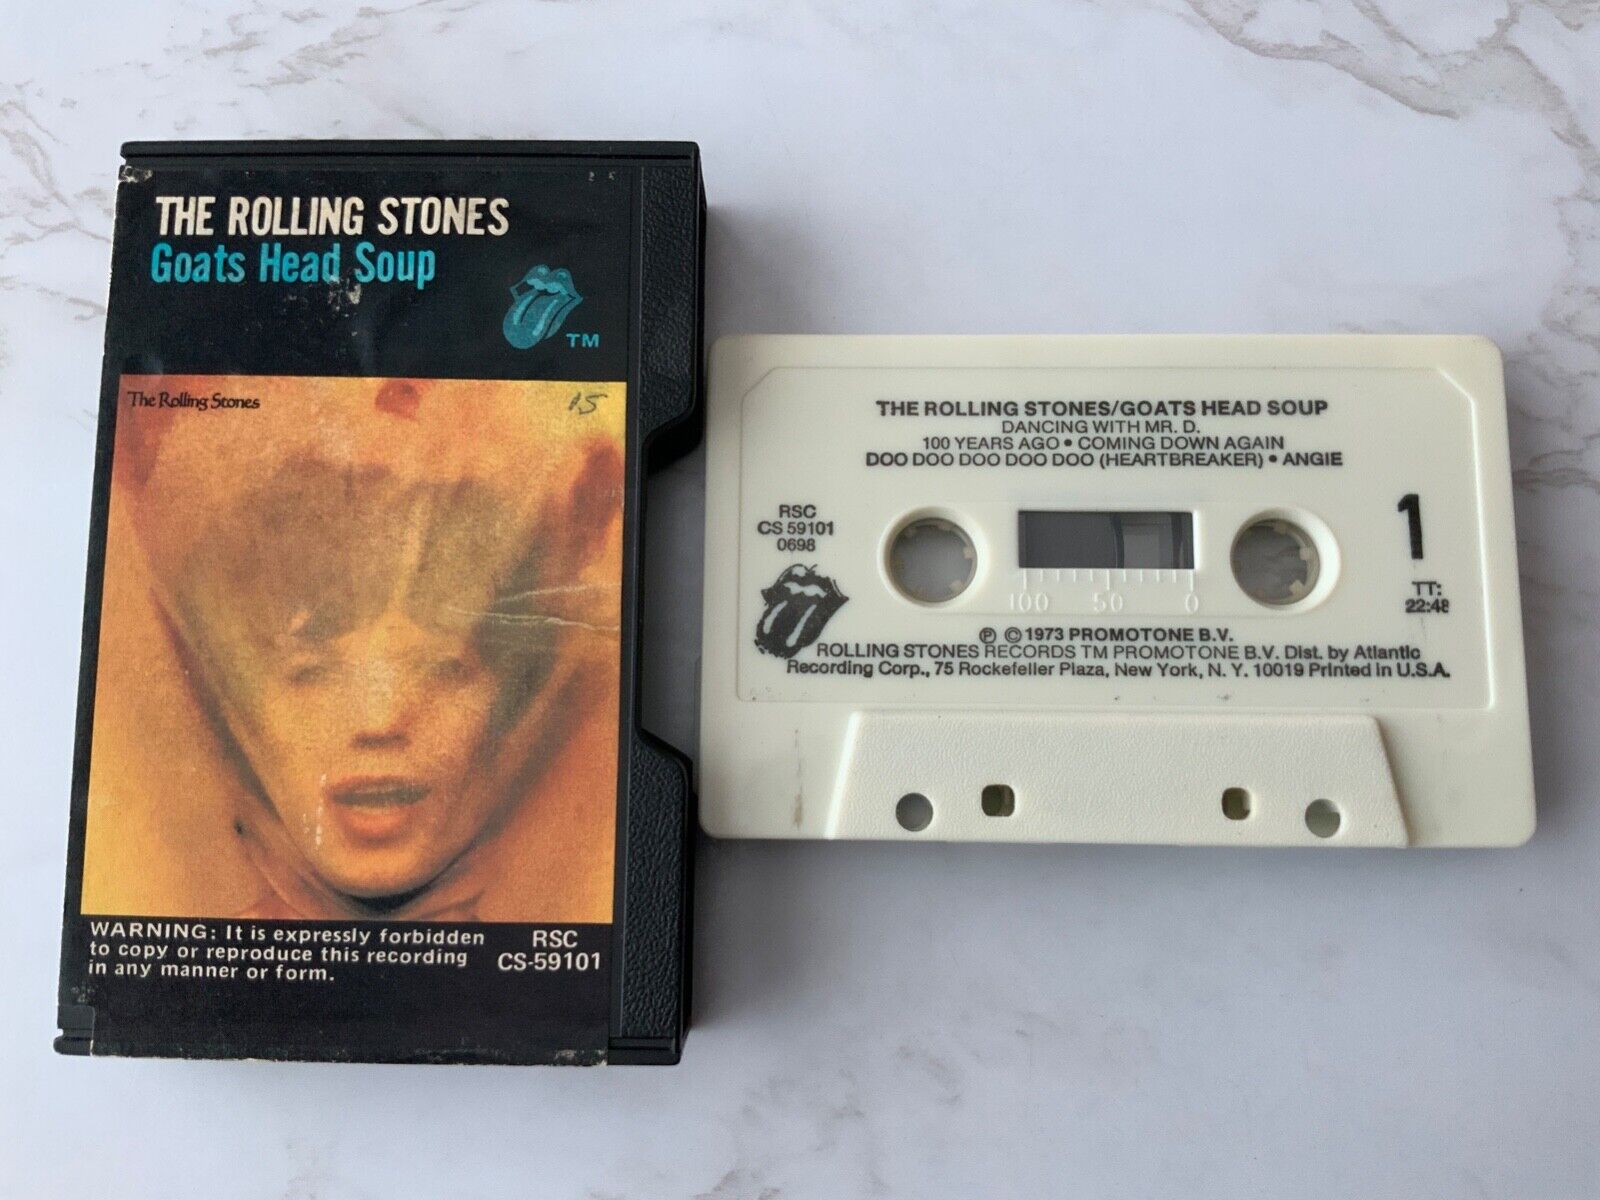 The Rolling Stones Goats Head Soup CASSETTE Tape 1973 BLACK SHELL Mick Jagger